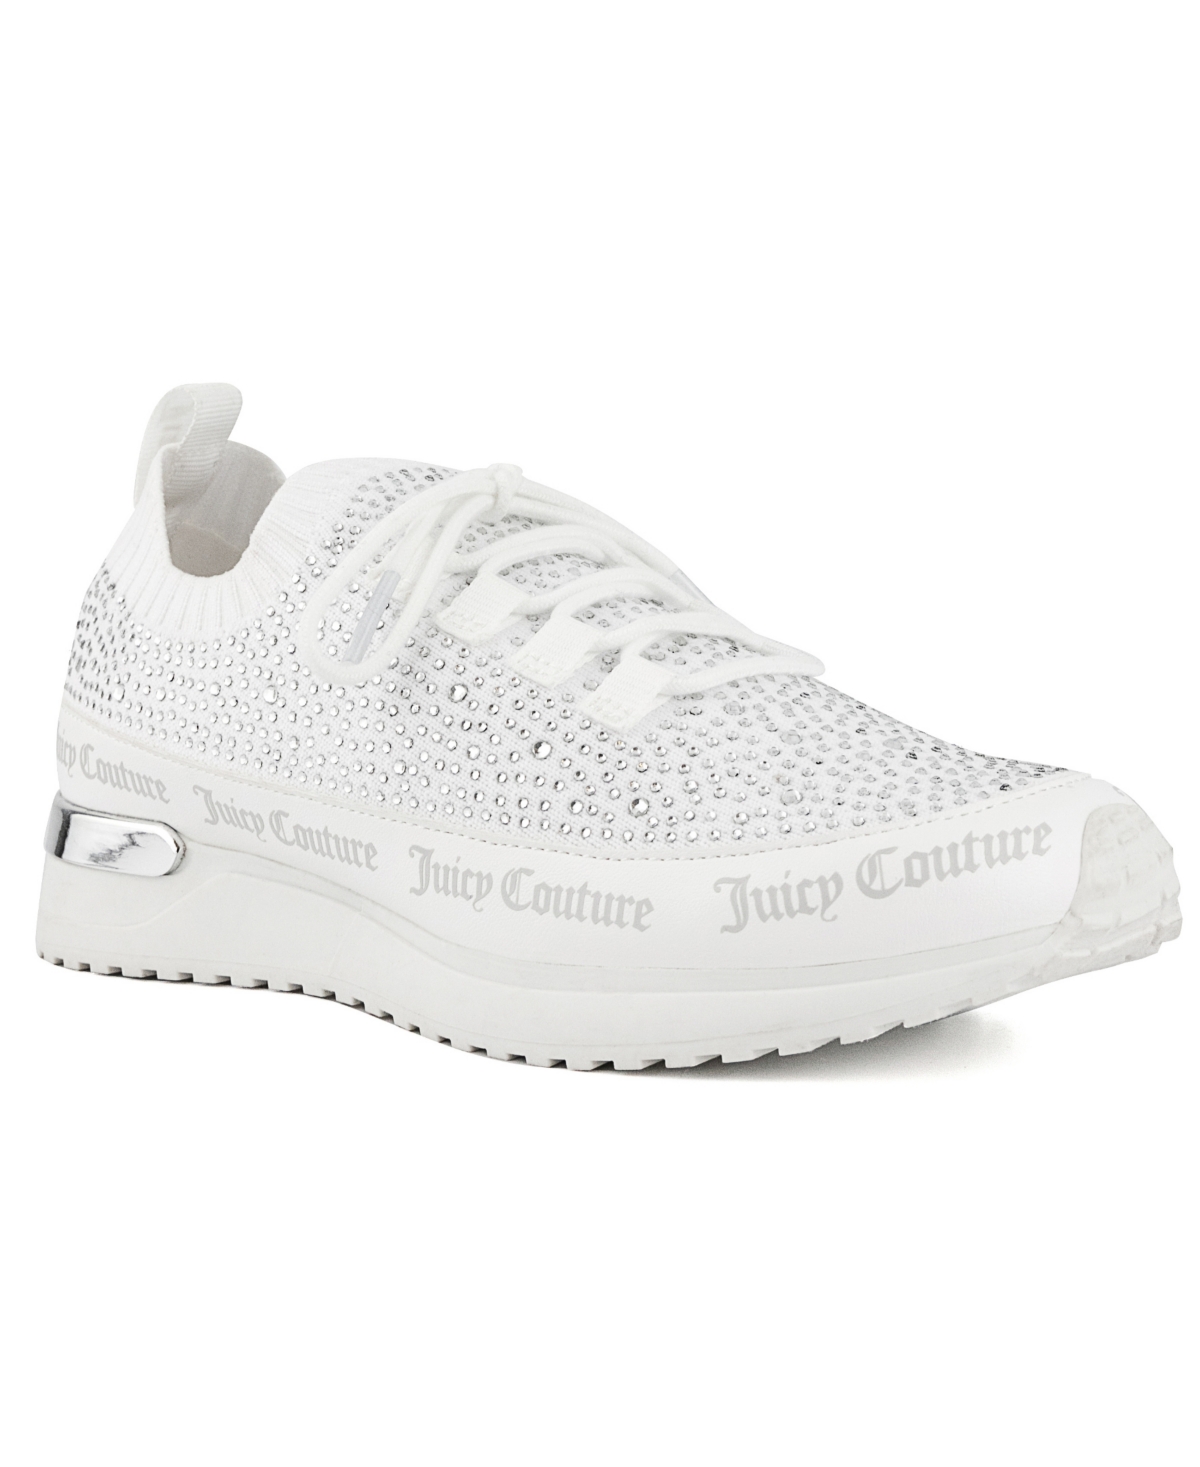 Juicy Couture Women's Bellamy Embellished Sneakers Women's Shoes